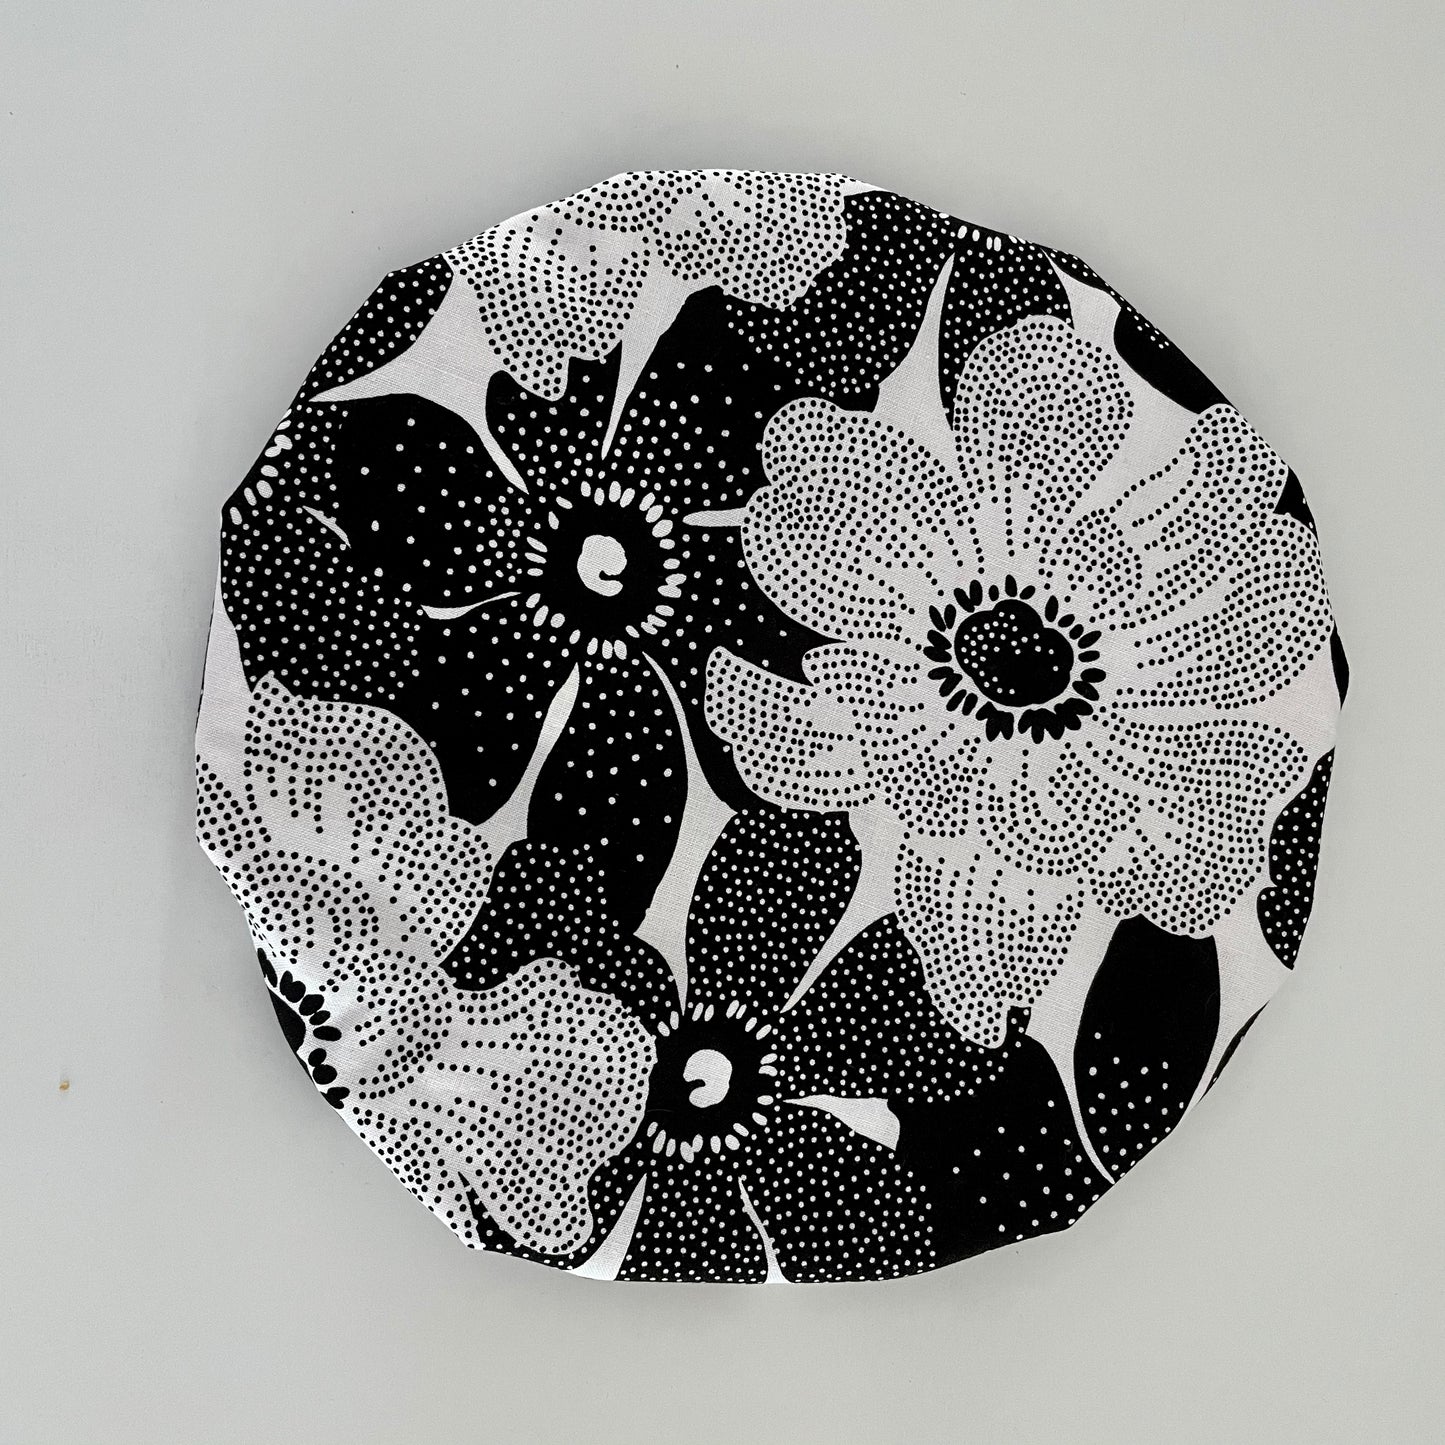 Stand Mixer Bowl Covers - Black and White Floral